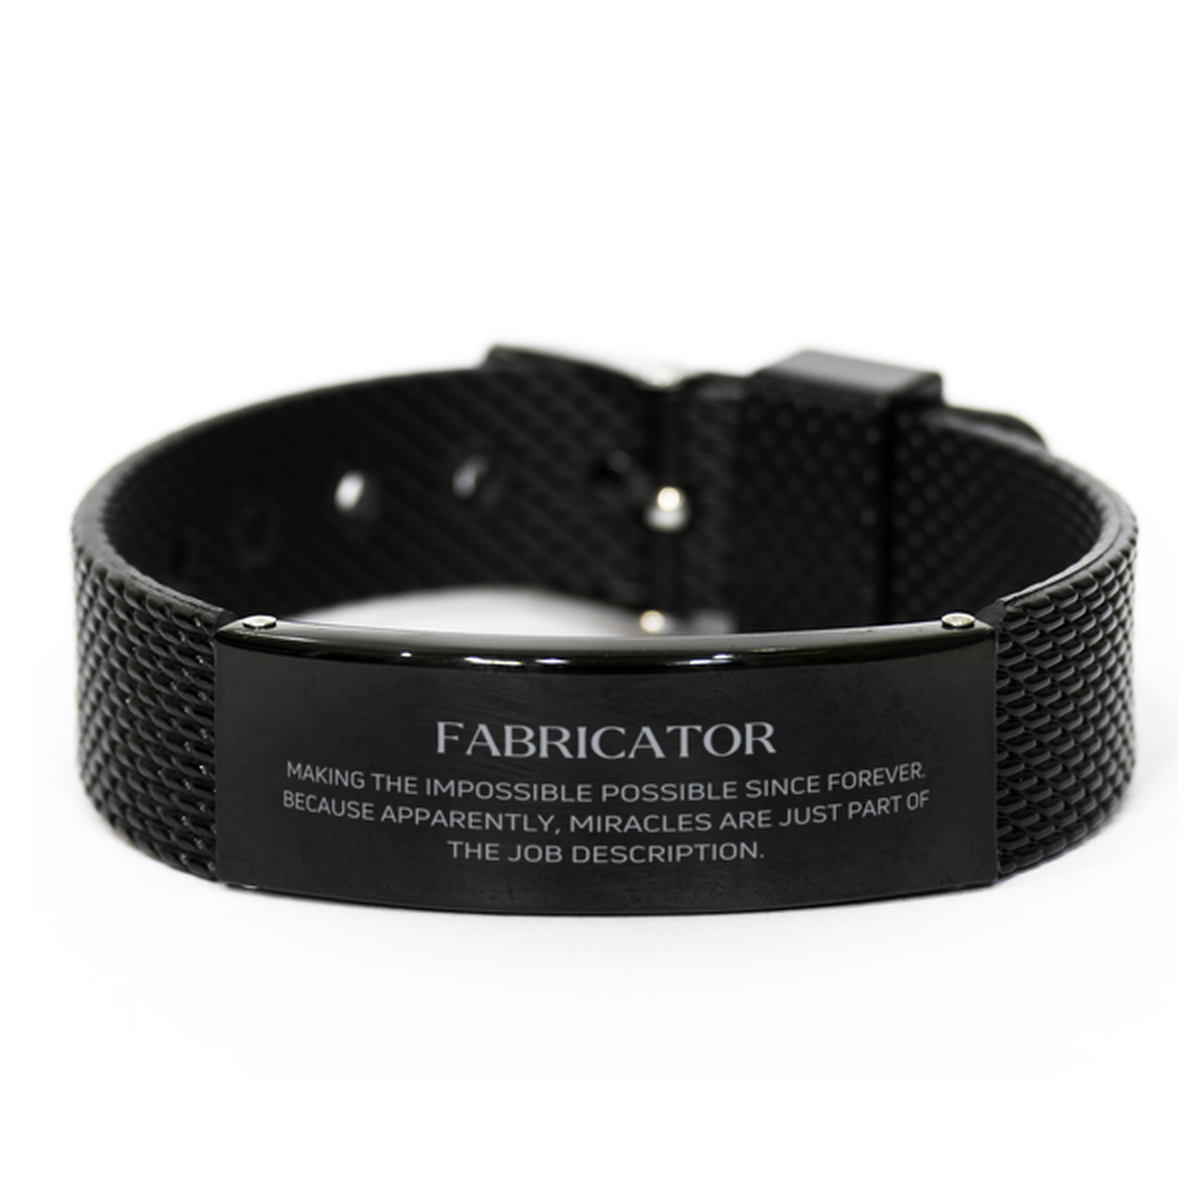 Funny Fabricator Gifts, Miracles are just part of the job description, Inspirational Birthday Black Shark Mesh Bracelet For Fabricator, Men, Women, Coworkers, Friends, Boss